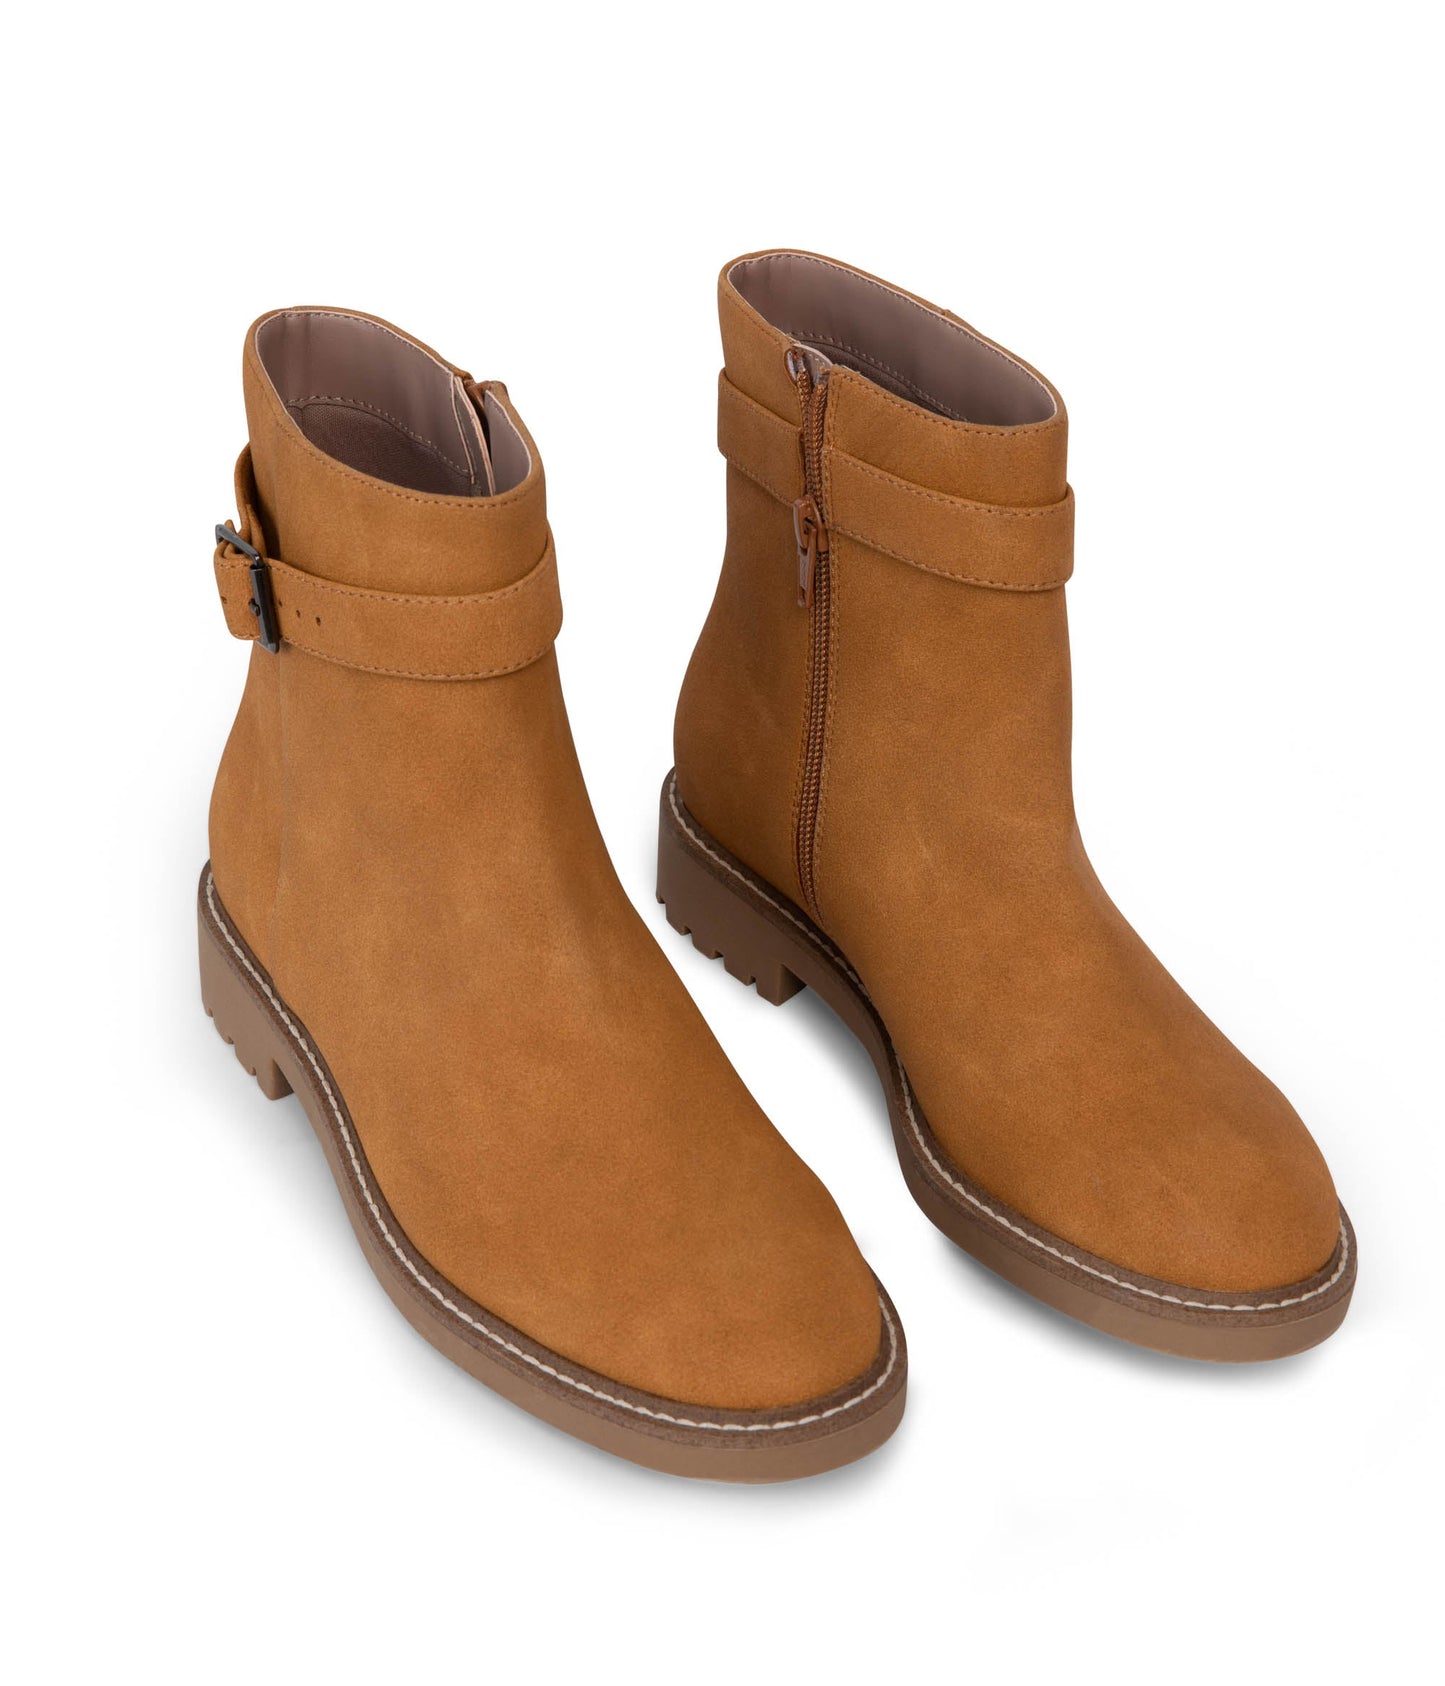 CHEA Women's Vegan Boots | Color: Brown - variant::chili